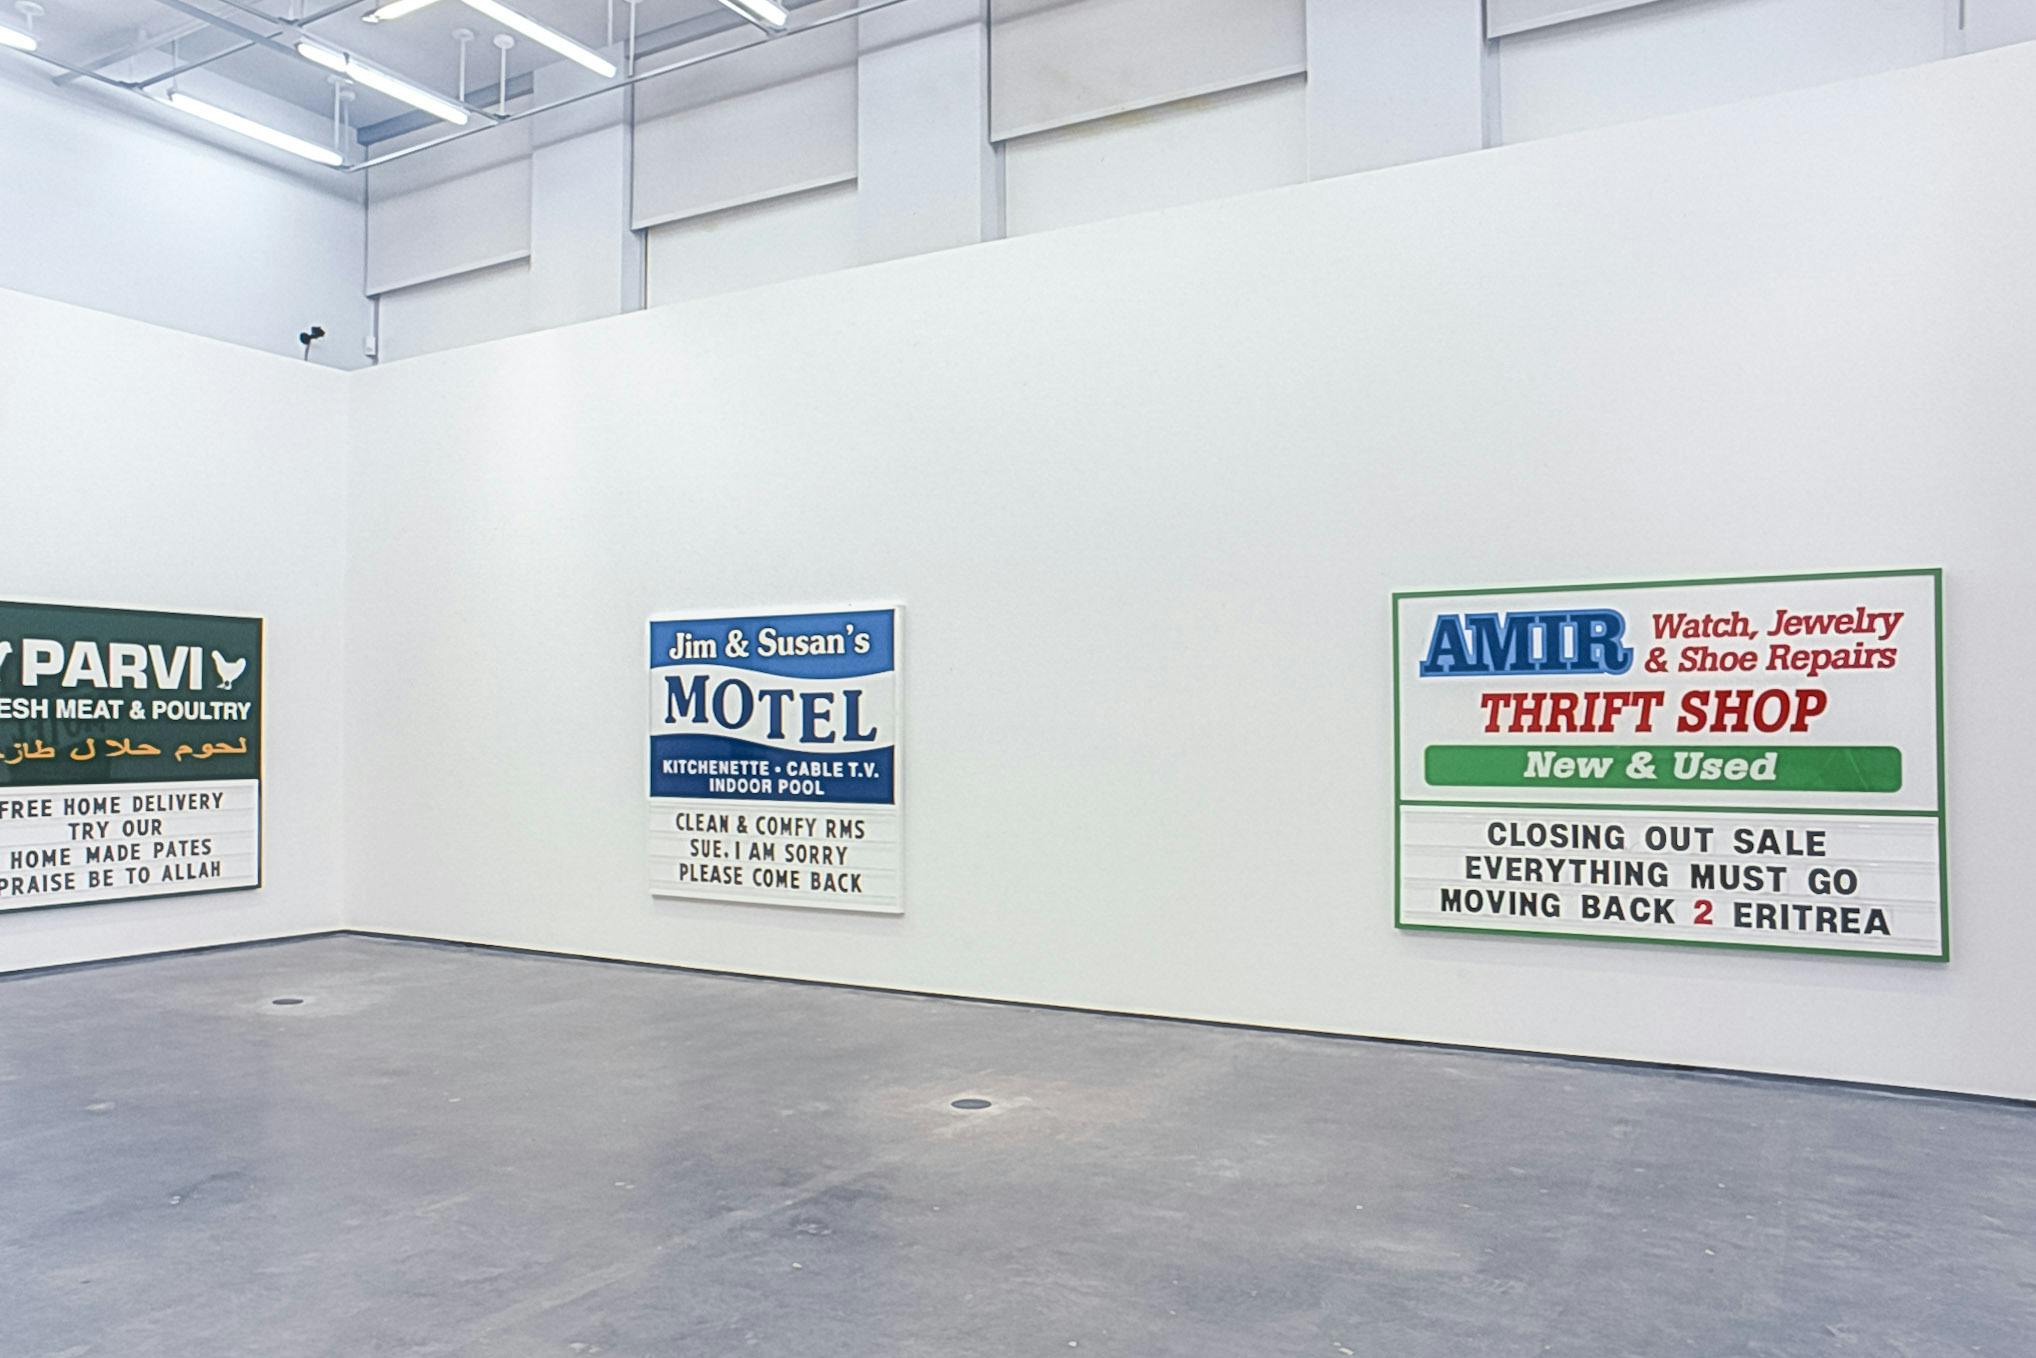 Ken Lum’s works are mounted on the gallery walls. They are text based two dimensional works with colourful advertisement posters. Their sizes vary, but many of them are larger than human scale.